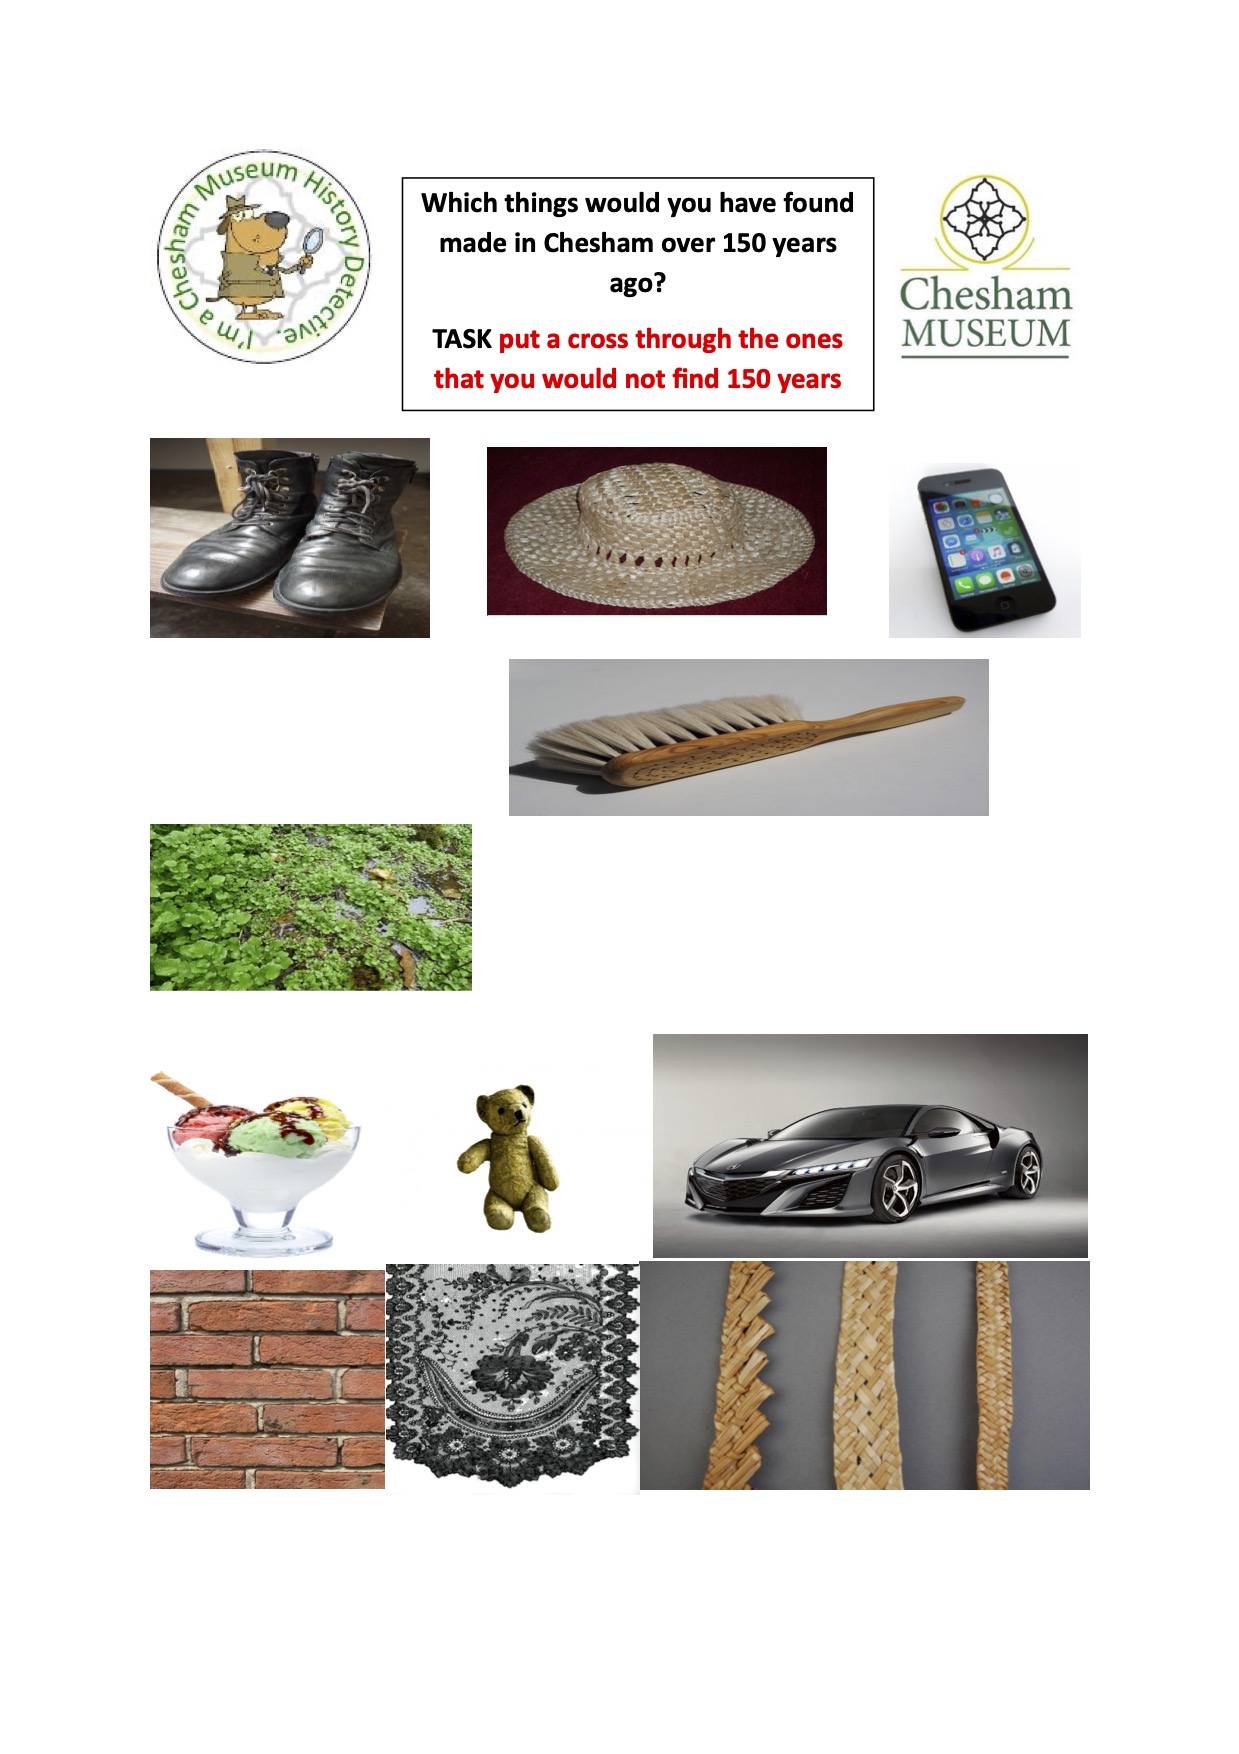 What was made in Chesham 150 years ago?